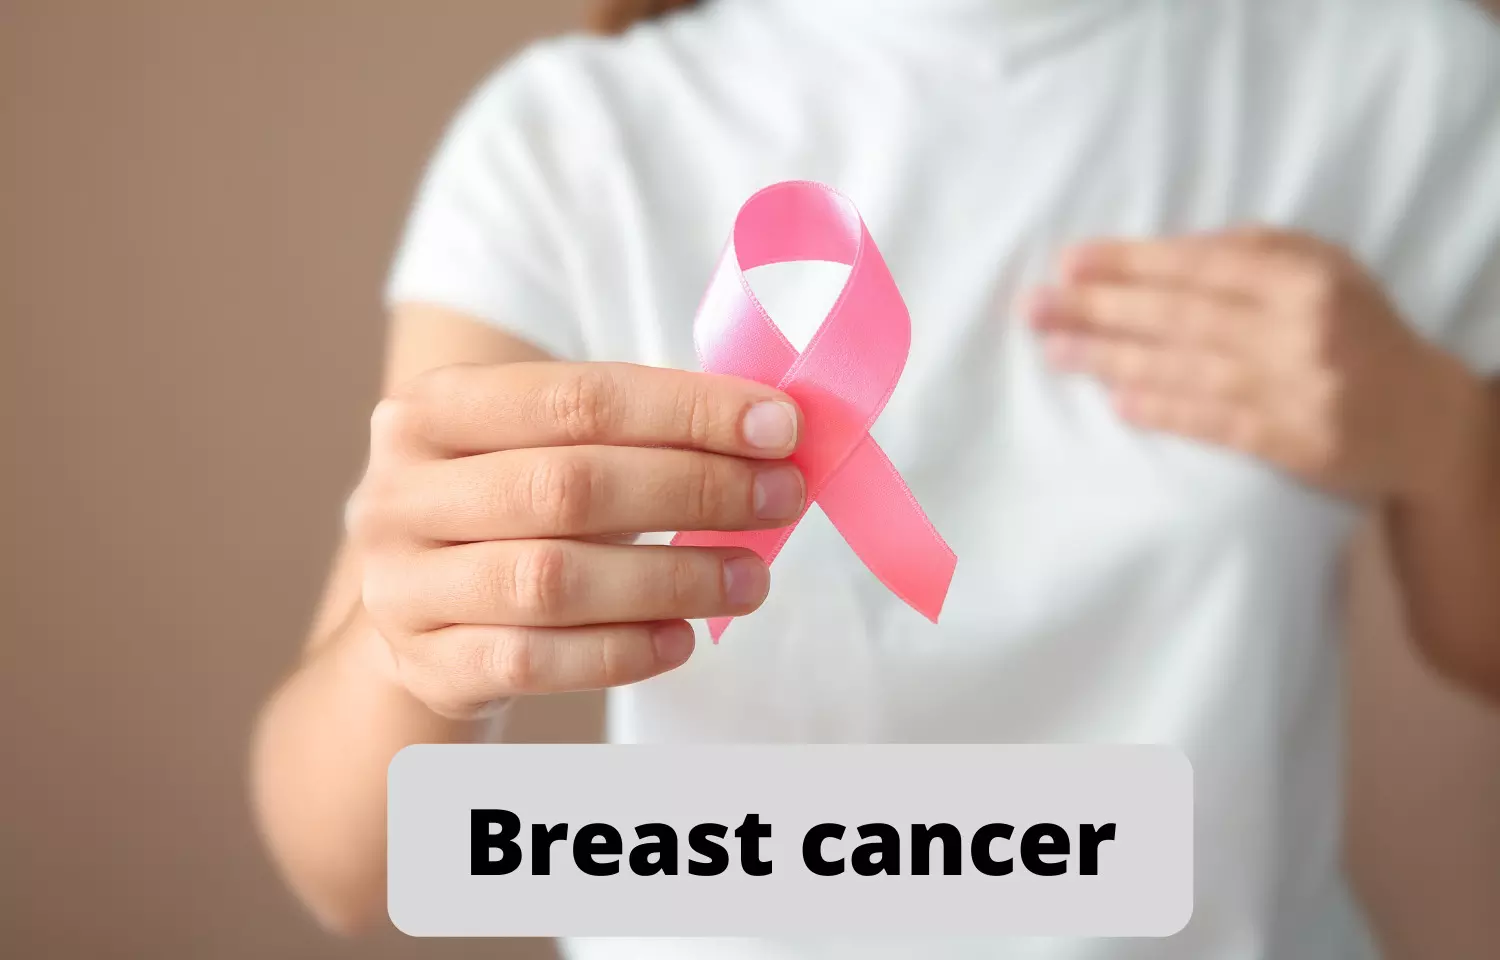 GSVM Medical College offers breast cancer treatment at Re 1